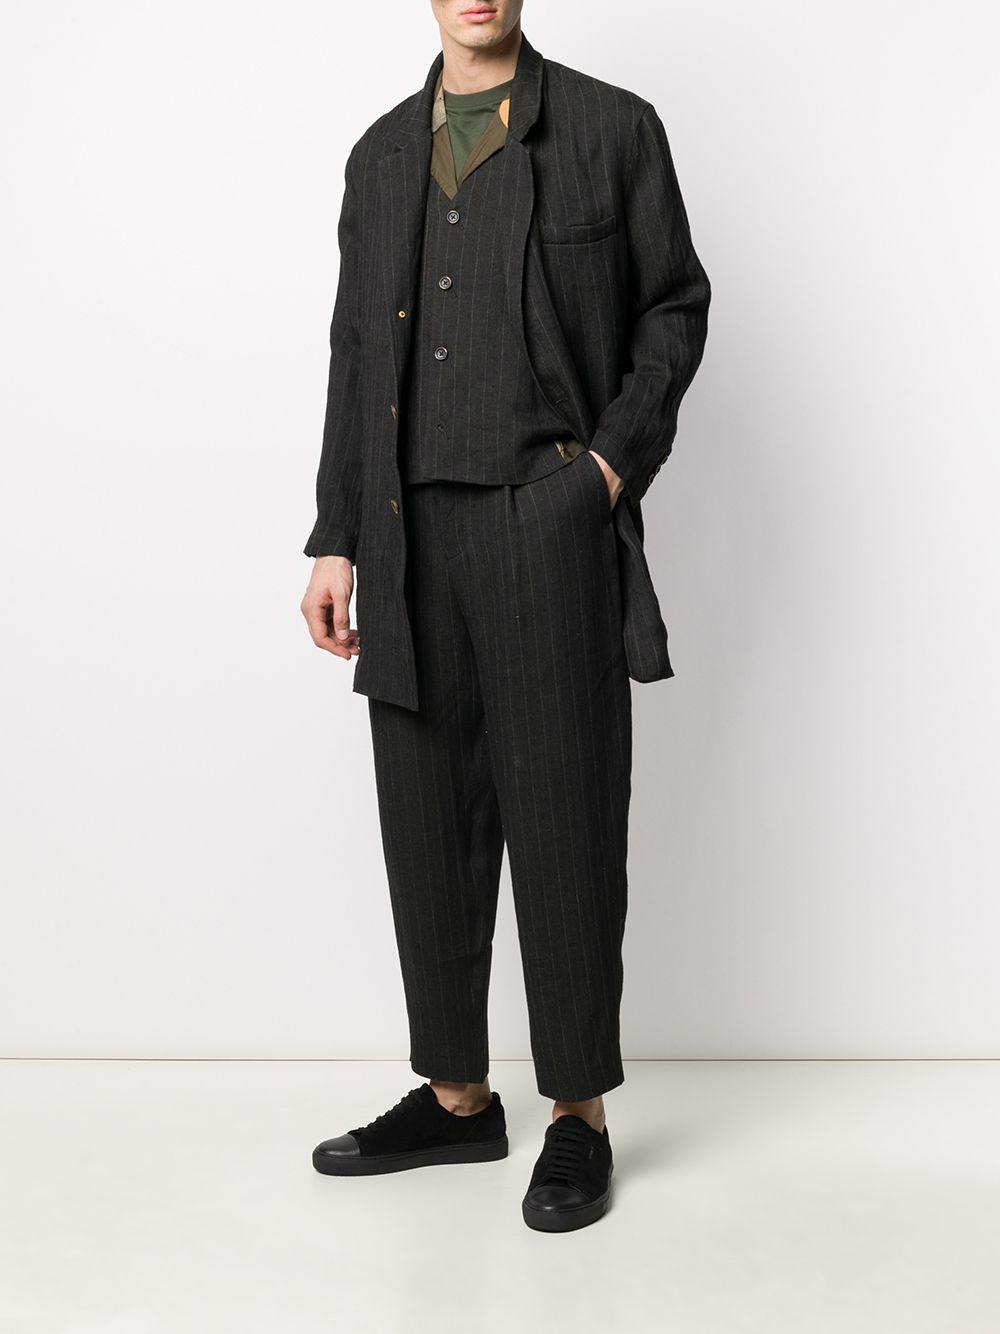 Uma Wang Linen Single-breasted Pinstriped Coat in Black for Men - Lyst